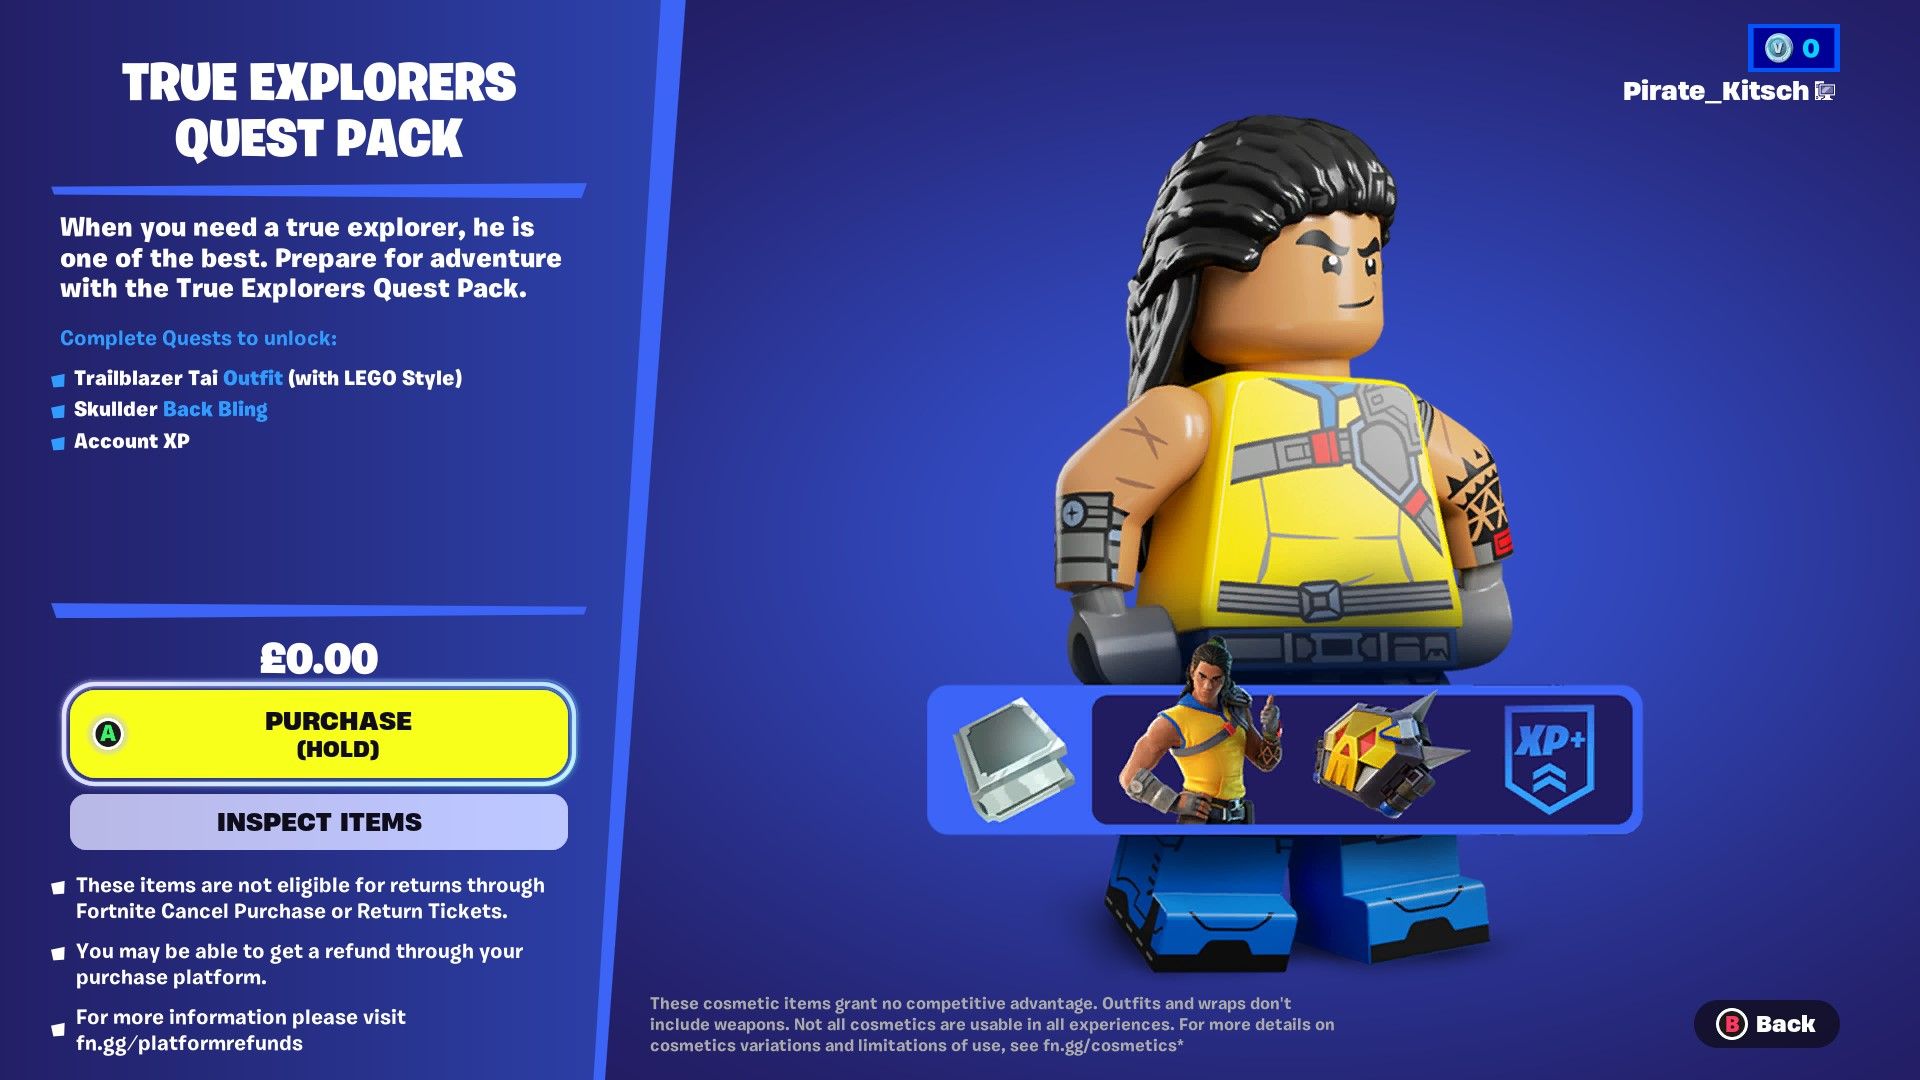 The True Explorers Quest Pack confirmation purchase screen in Fortnite.